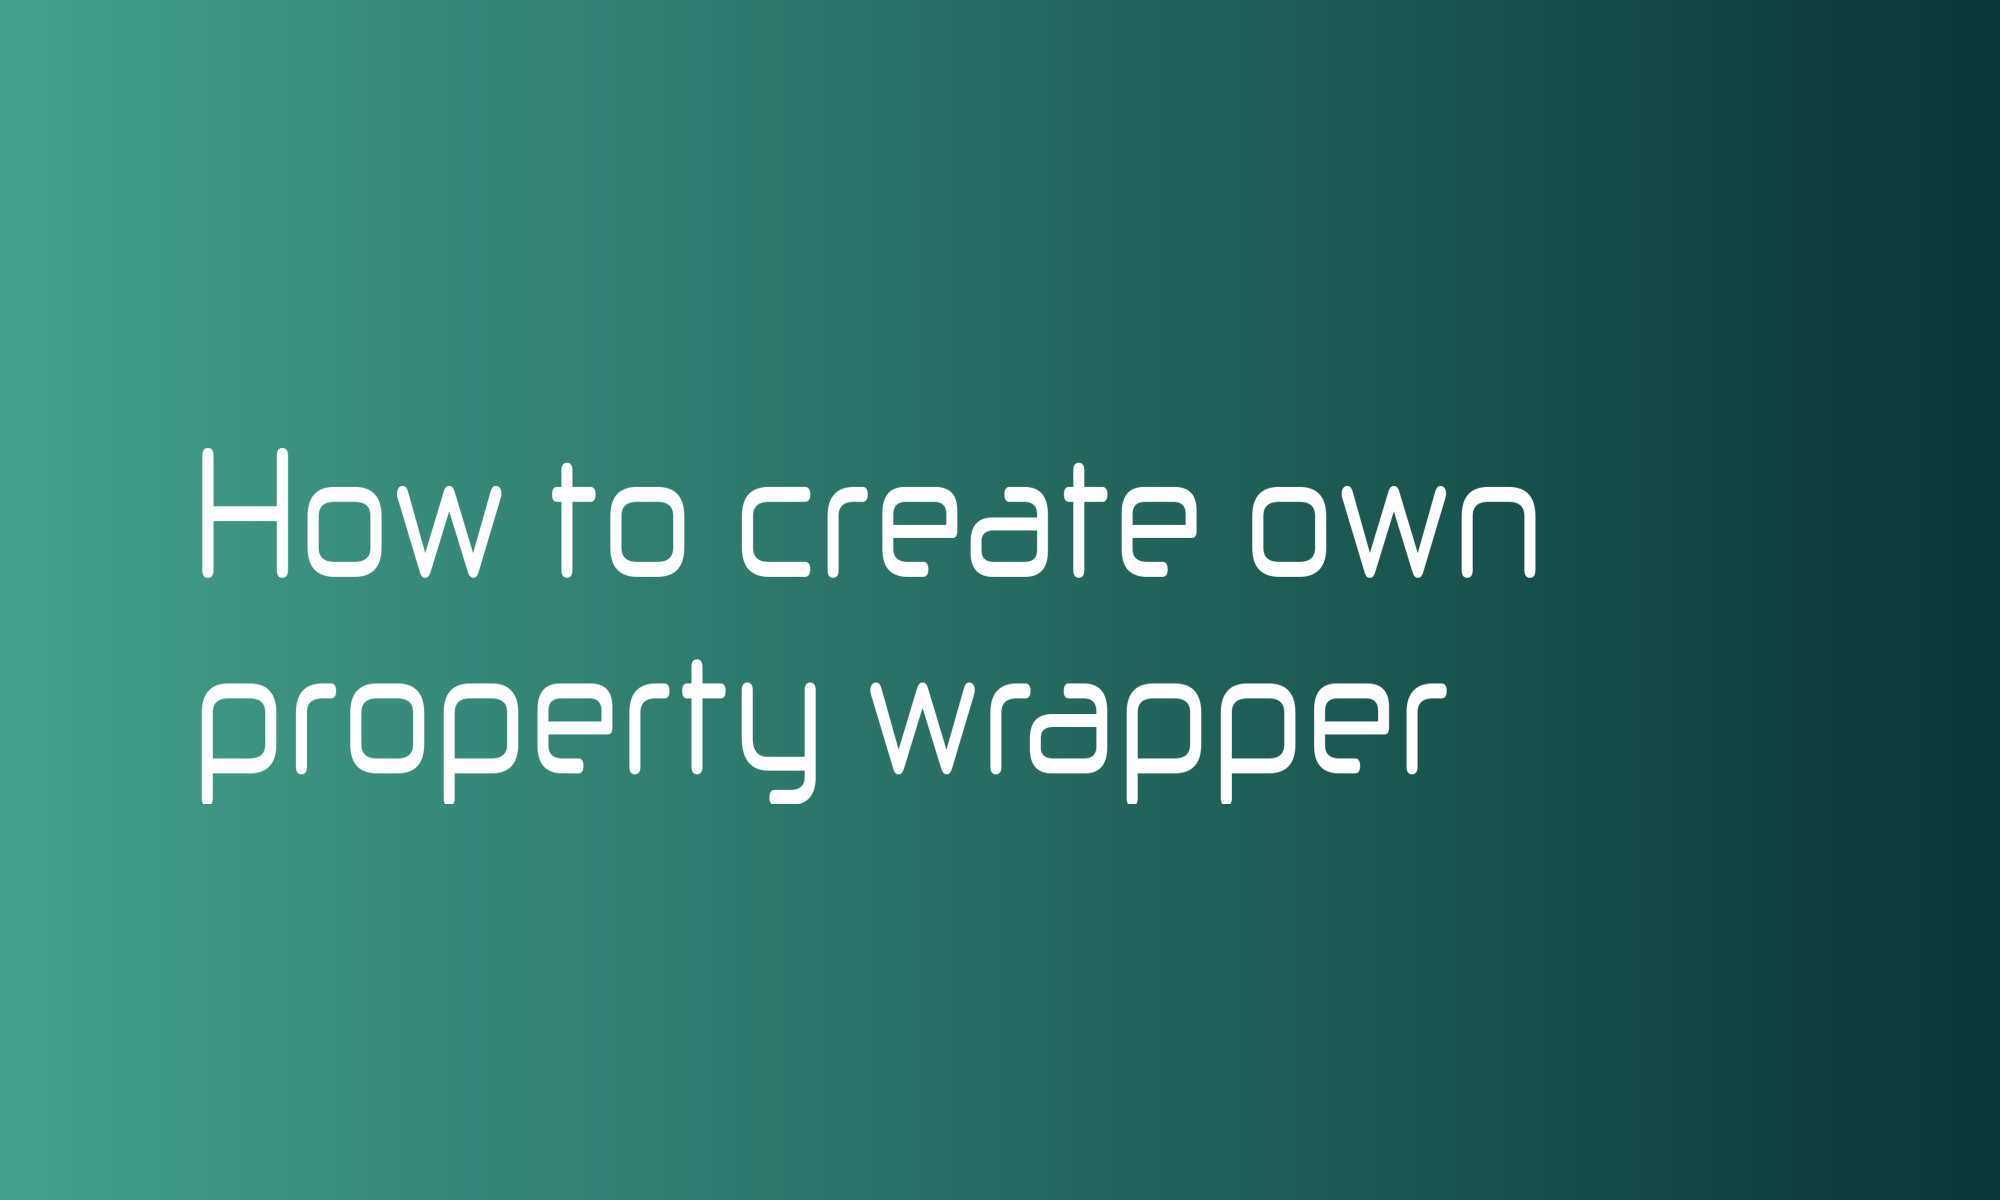 How to create own property wrapper